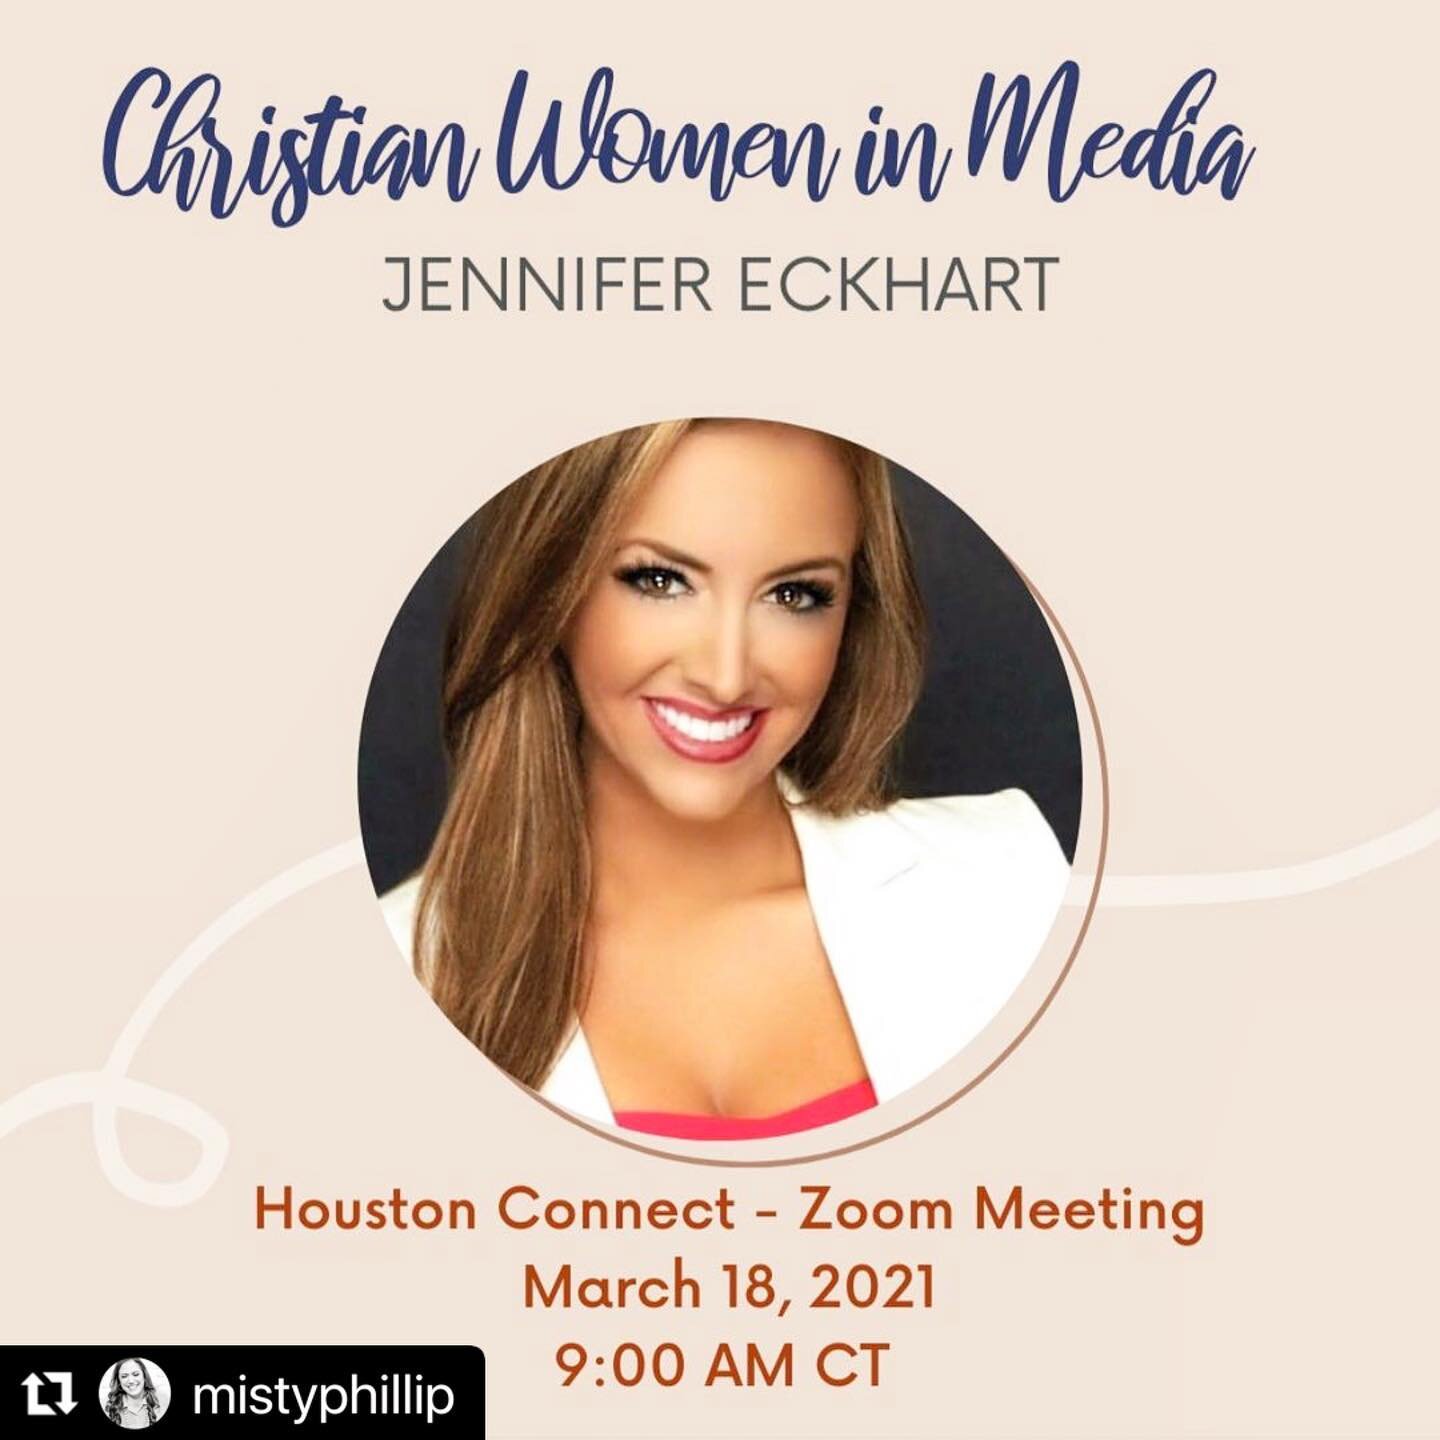 Honored to be the special guest speaker of this event! Excited to lead this group of women in the media. 🎥🎤 #Repost @mistyphillip 

・・・
🌟Women in Media🌟

JOIN US FOR THE HOUSTON CONNECT MARCH MEETING 

FEATURING: JENNIFER ECKHART

Jennifer Eckhar